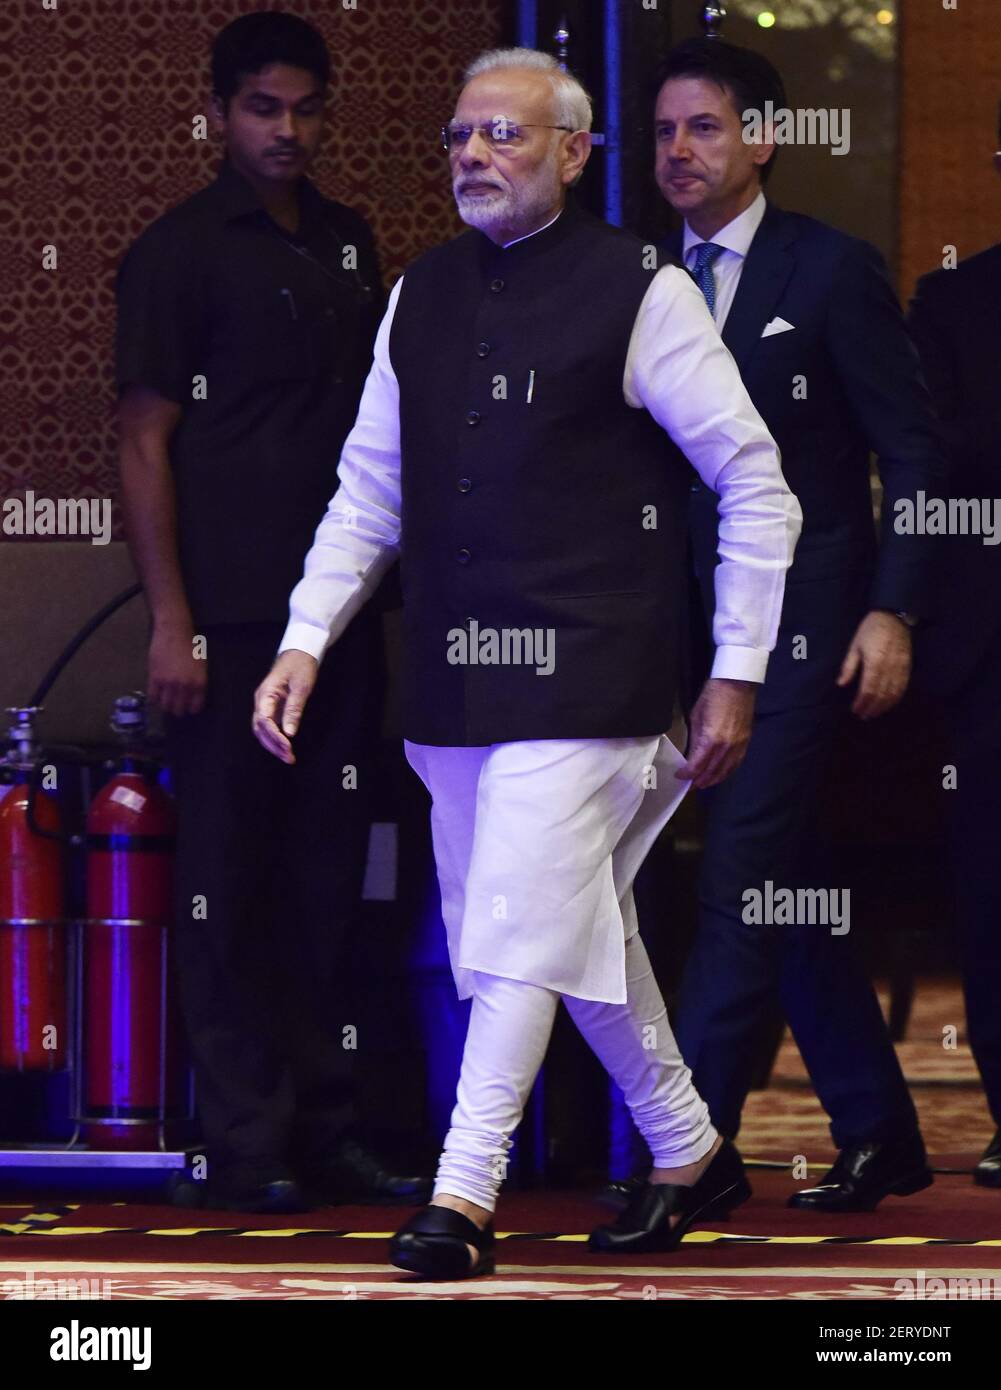 NEW DELHI, INDIA - OCTOBER 30: PM Narendra Modi at 24th edition of the India-Italy Technology Summit organised by the Department of Science and Technology in partnership with the CII on October 30, 2018 in New Delhi, India. (Photo by Vipin Kumar/Hindustan Times/Sipa USA) Stock Photo